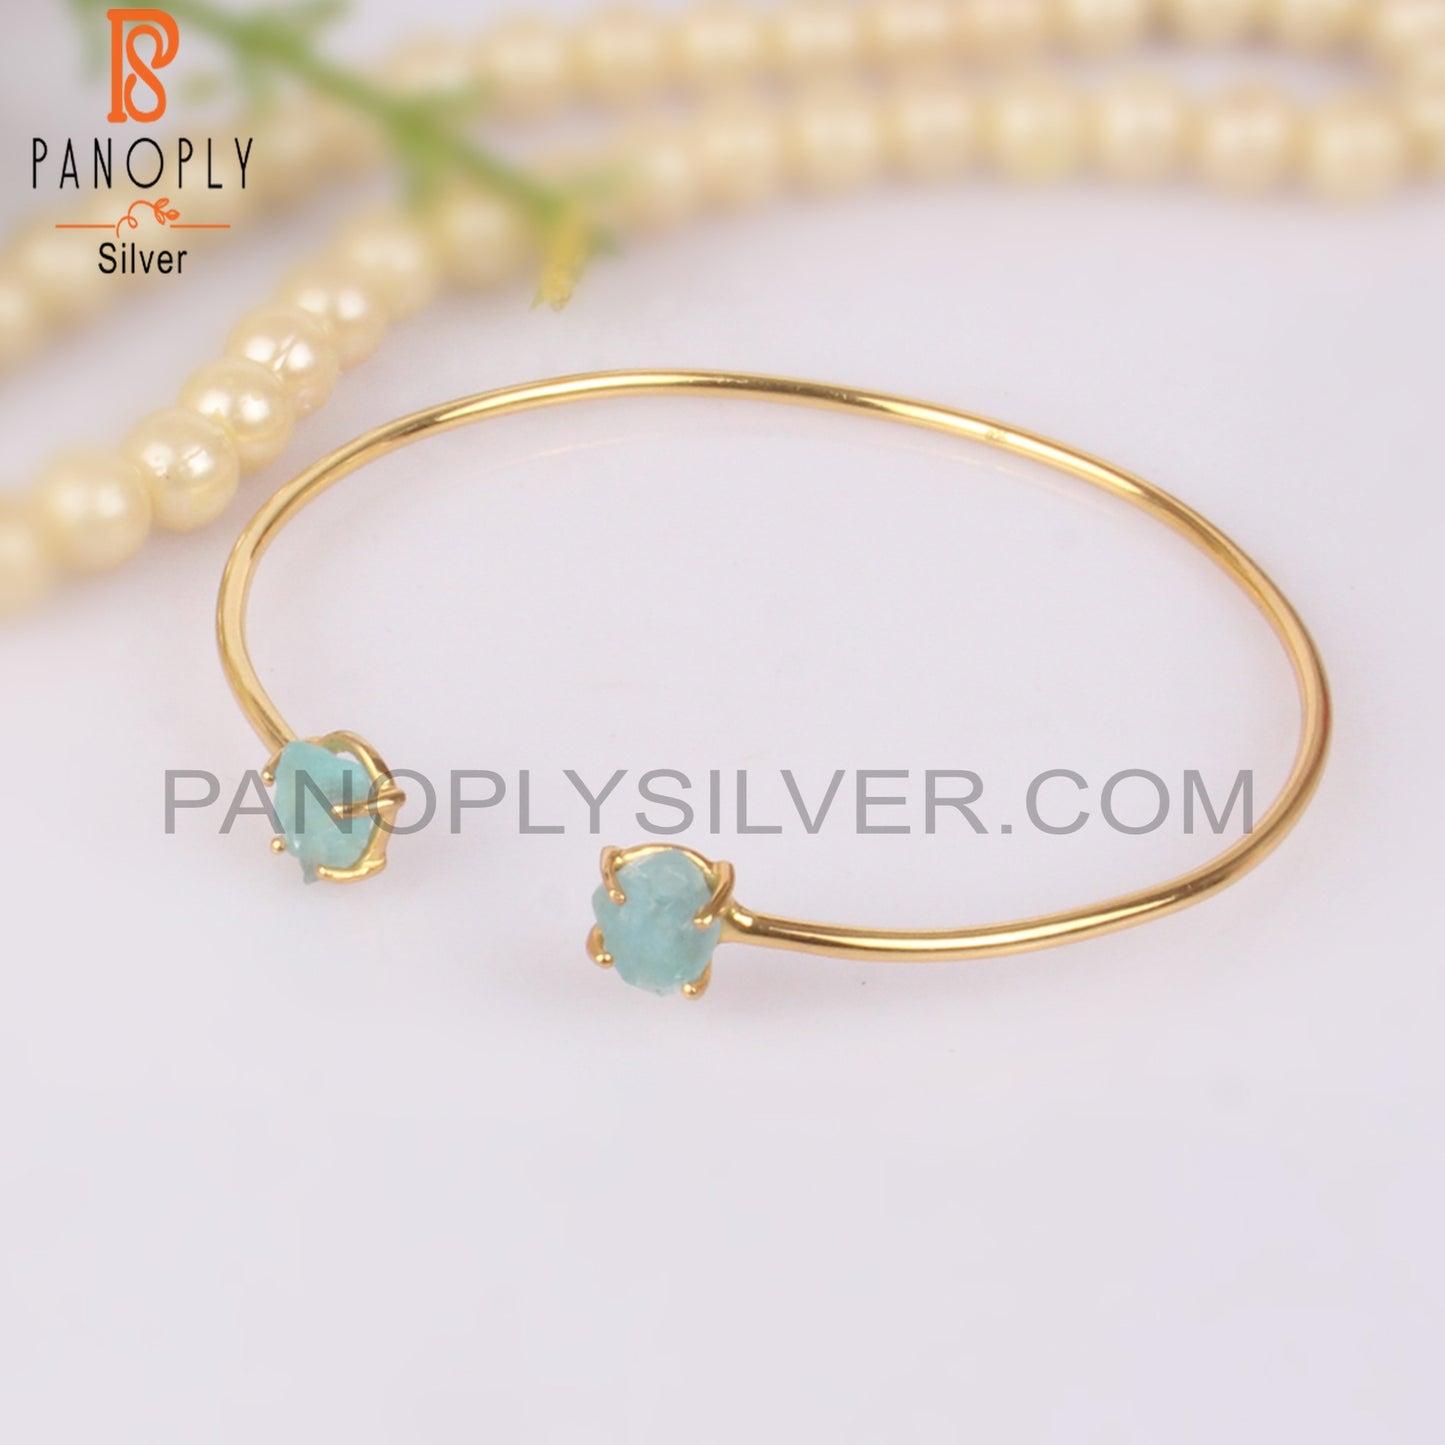 Apatite 925 Quality Openable Rough Bangles